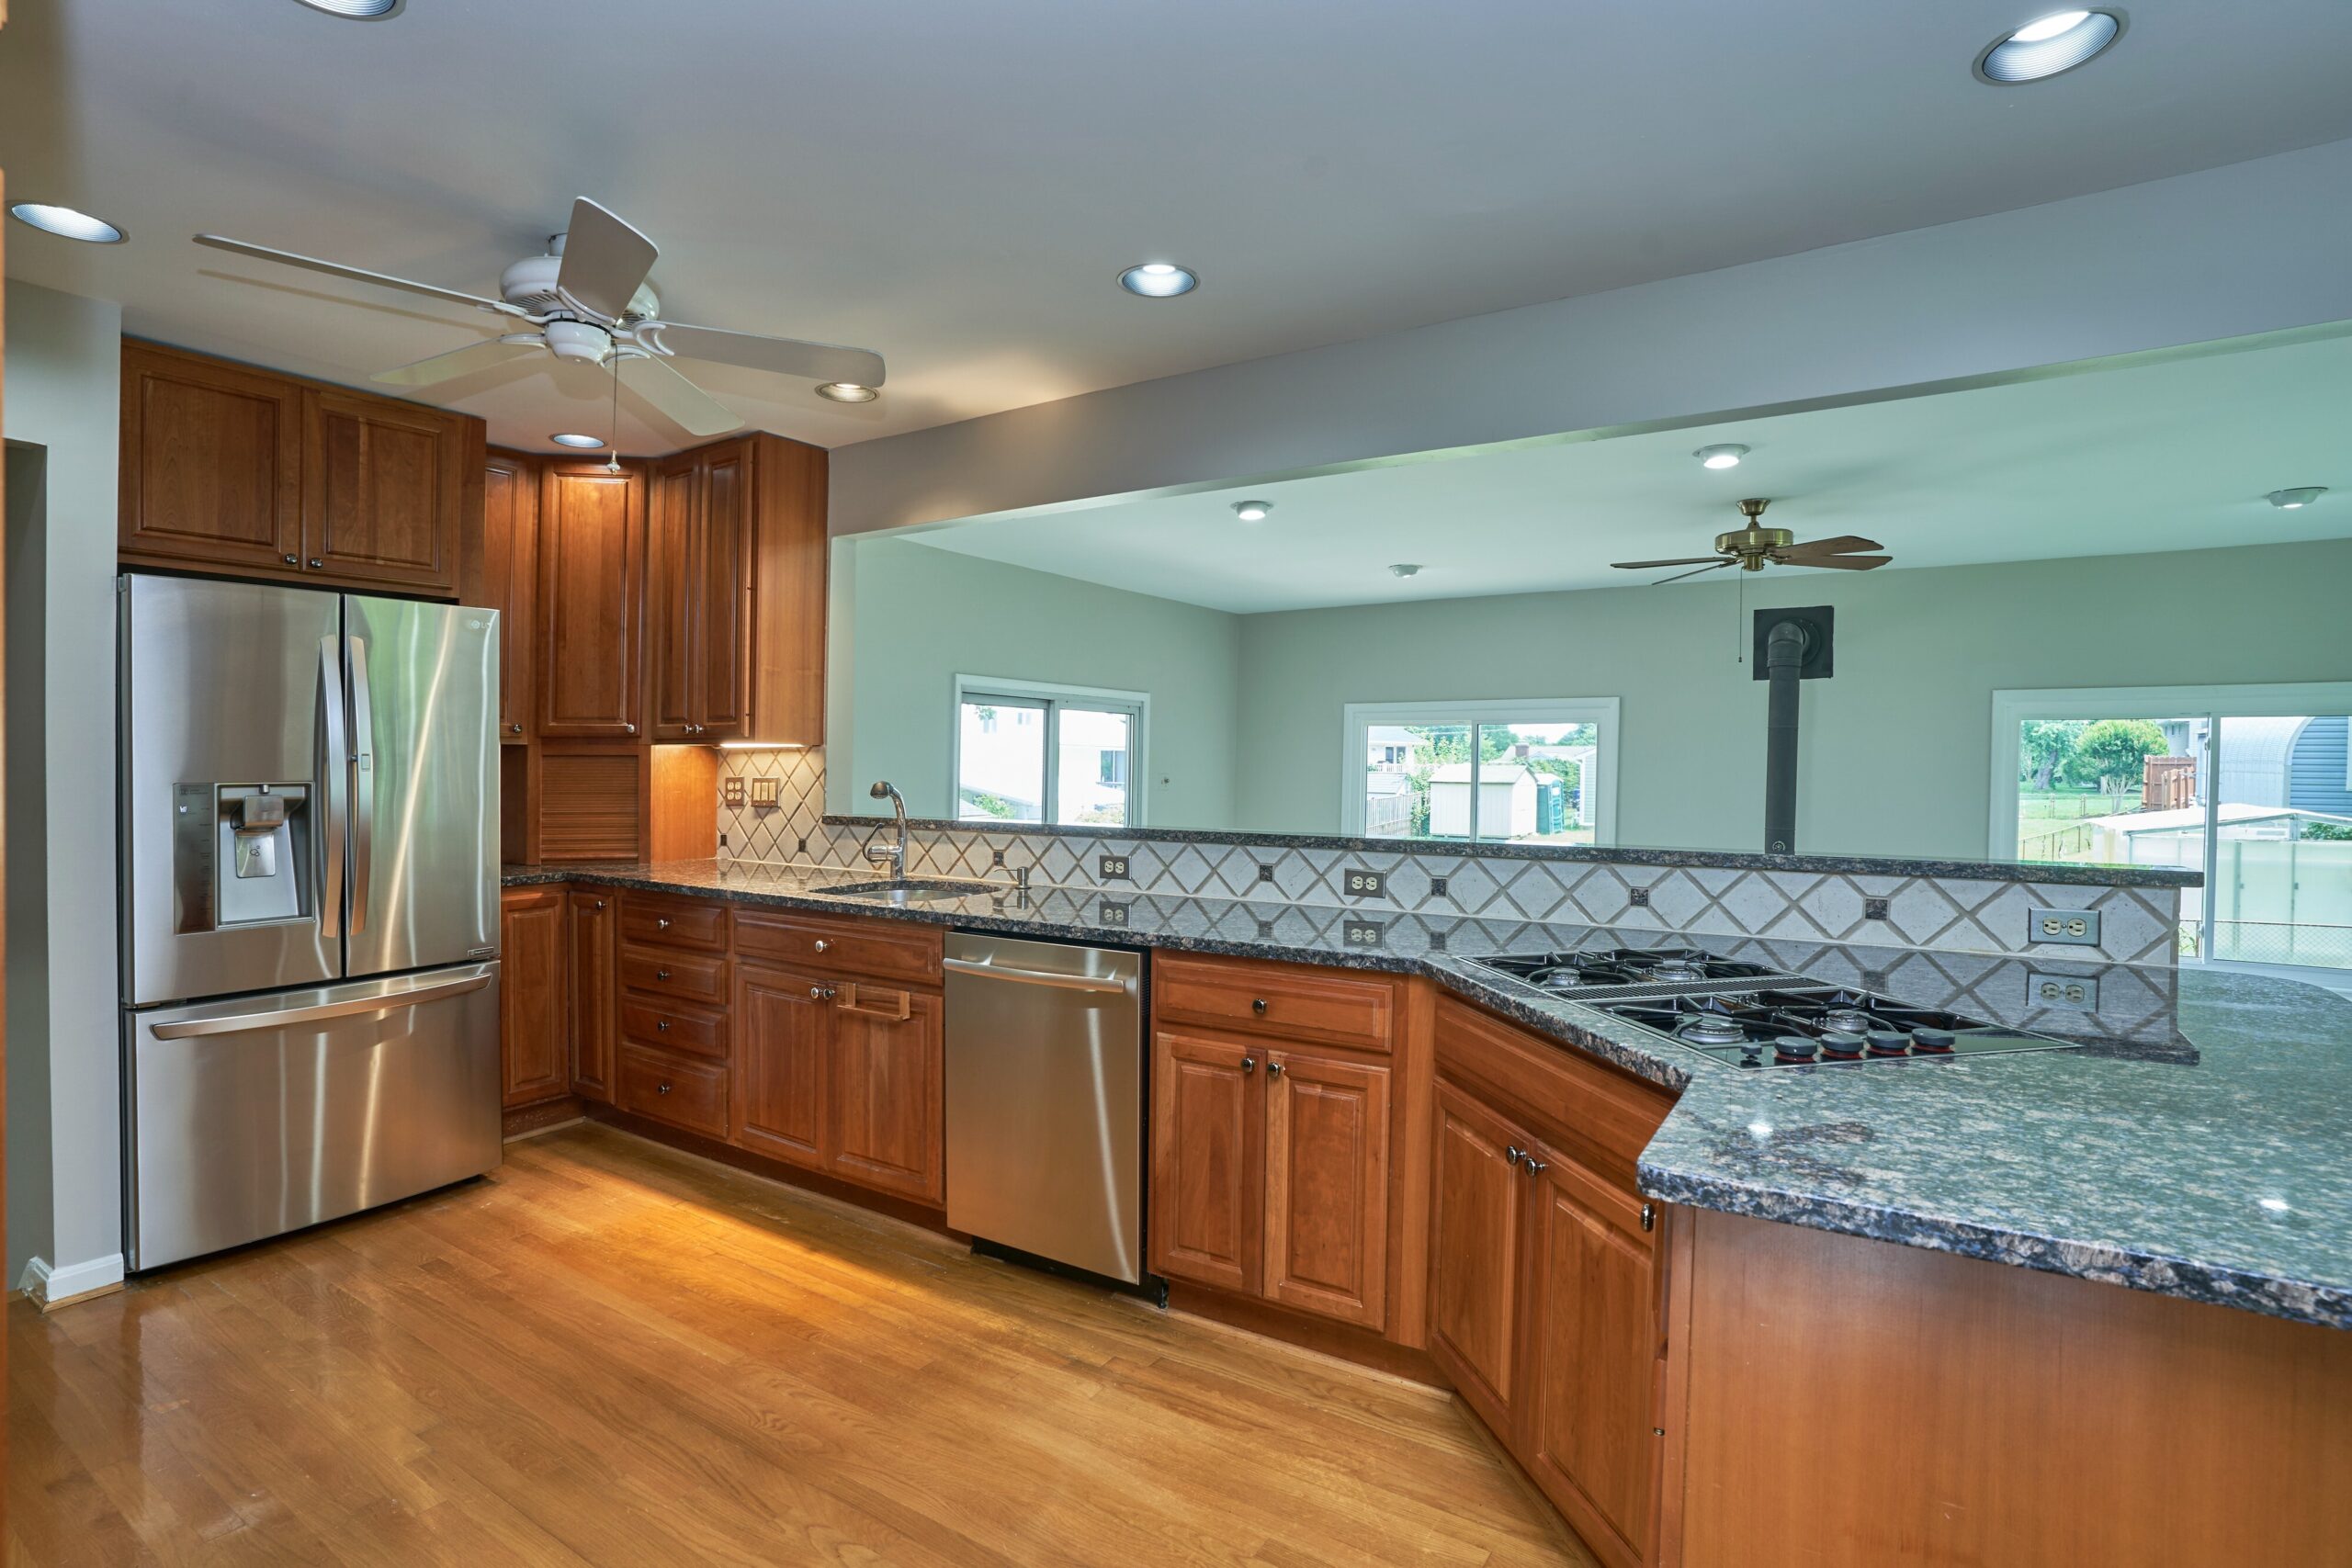 Professional interior photo of 5803 Sable Drive, Alexandria, VA - showing the kitchen with cherry cabinets, granite counters, large stainless appliances, and hardwood floors